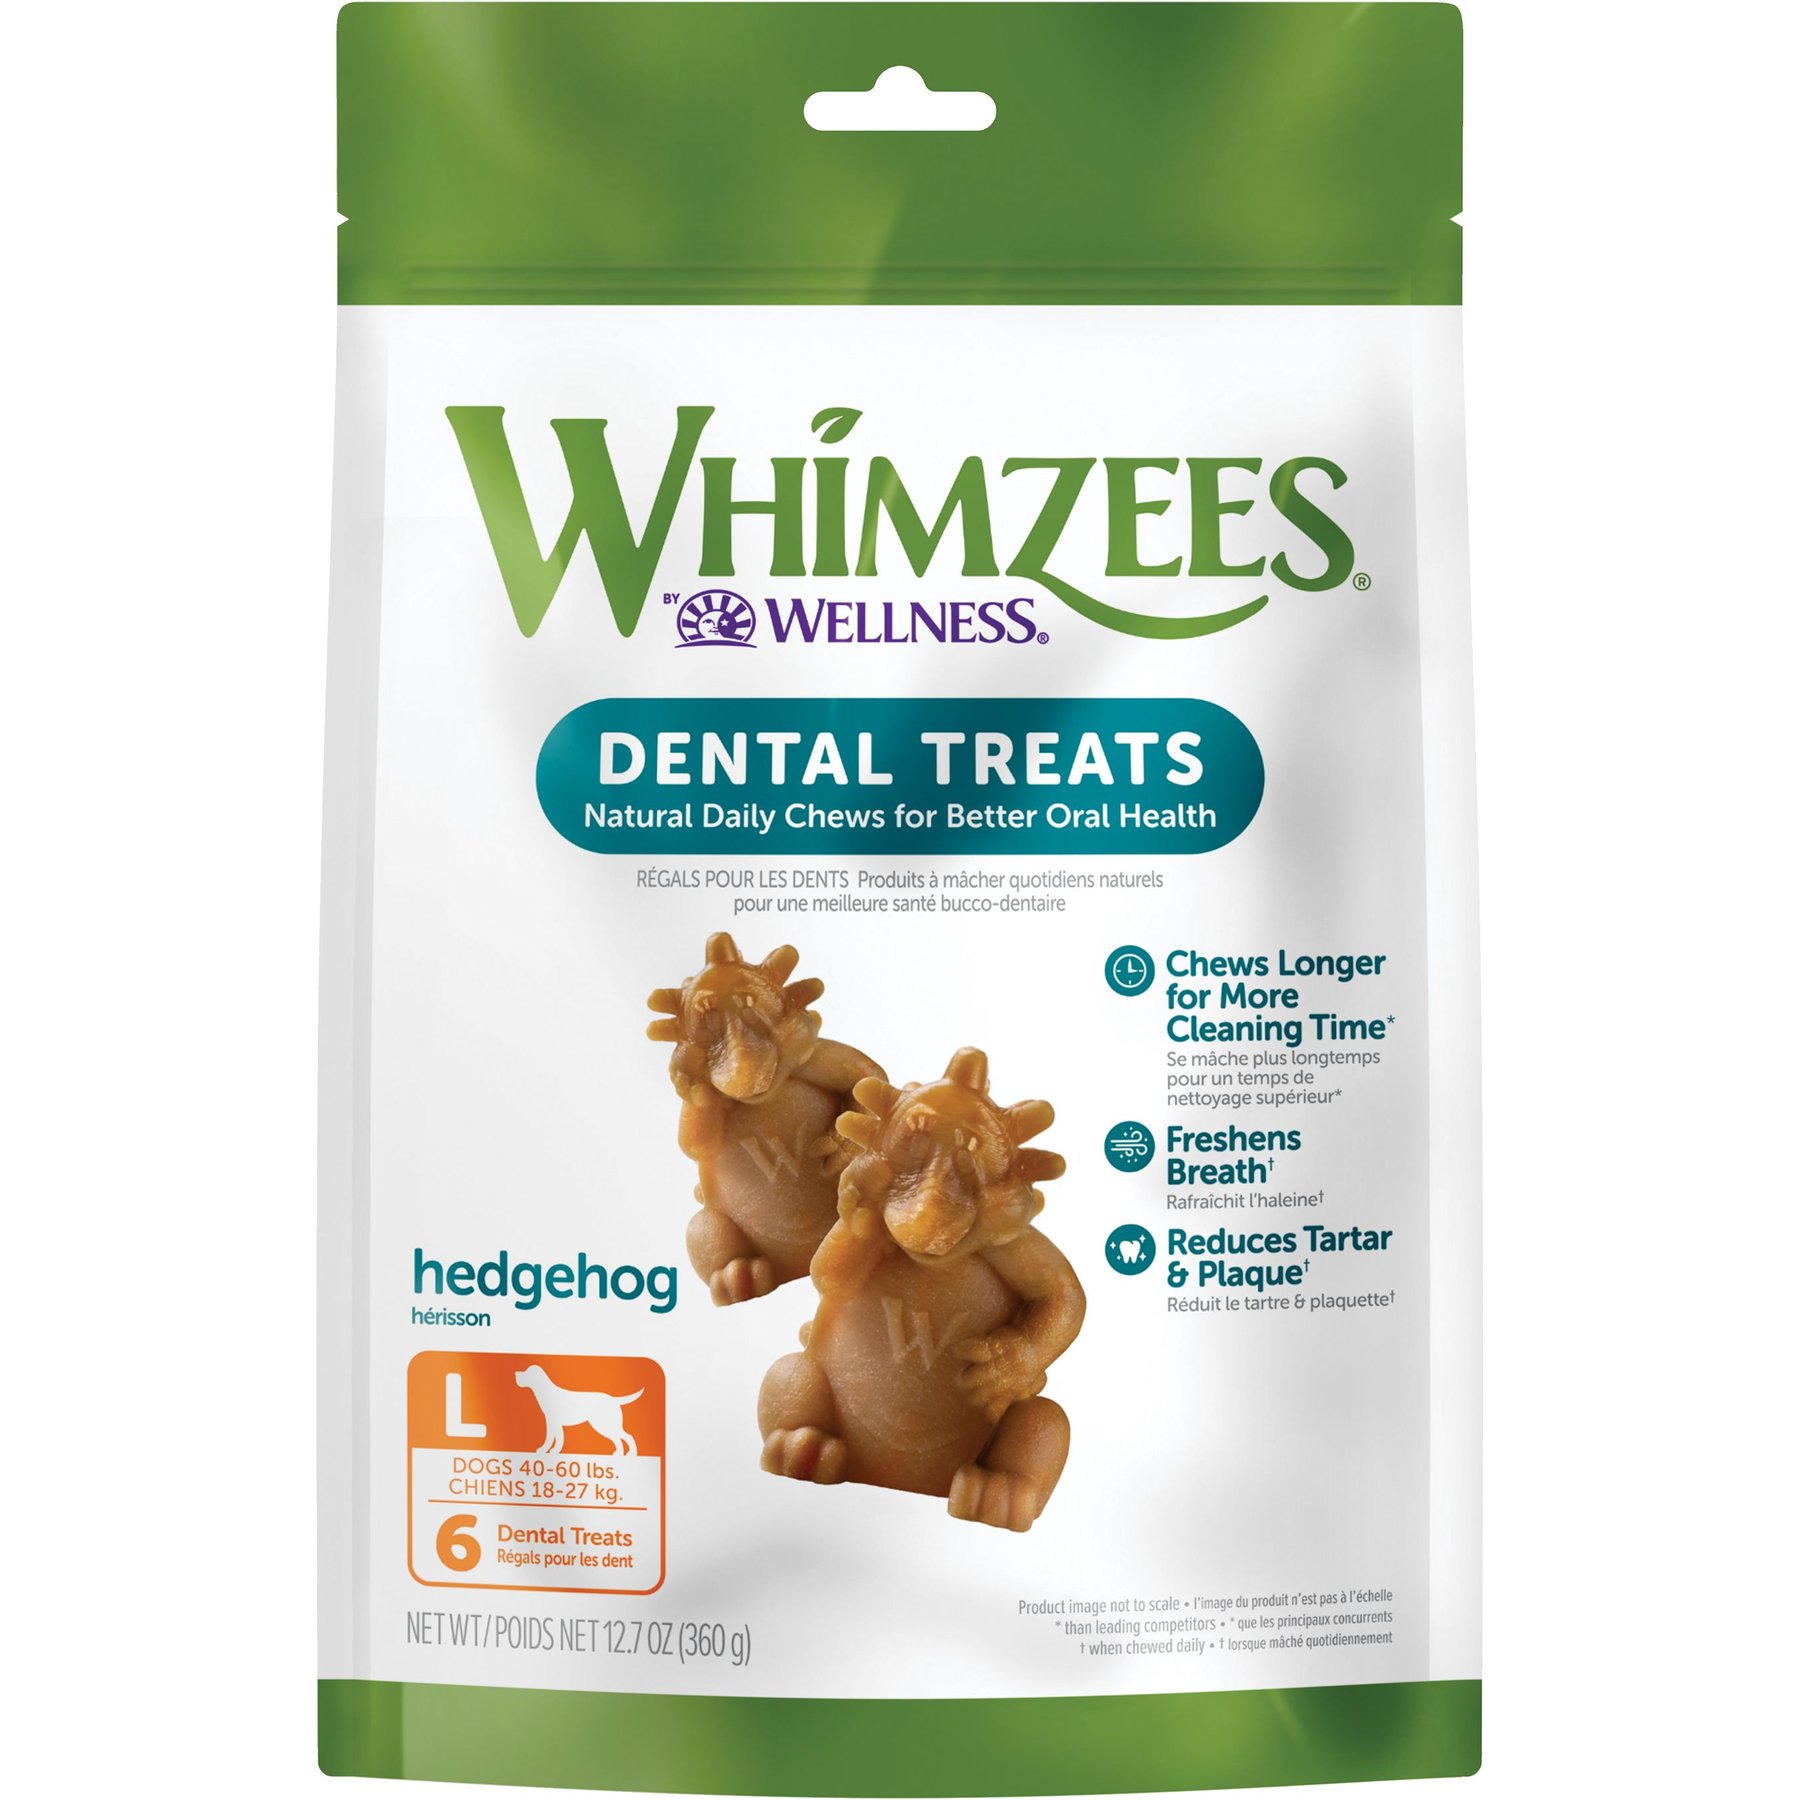 Save on Companion Chomp Bones Dog Treats for Toy & Small Dogs Order Online  Delivery